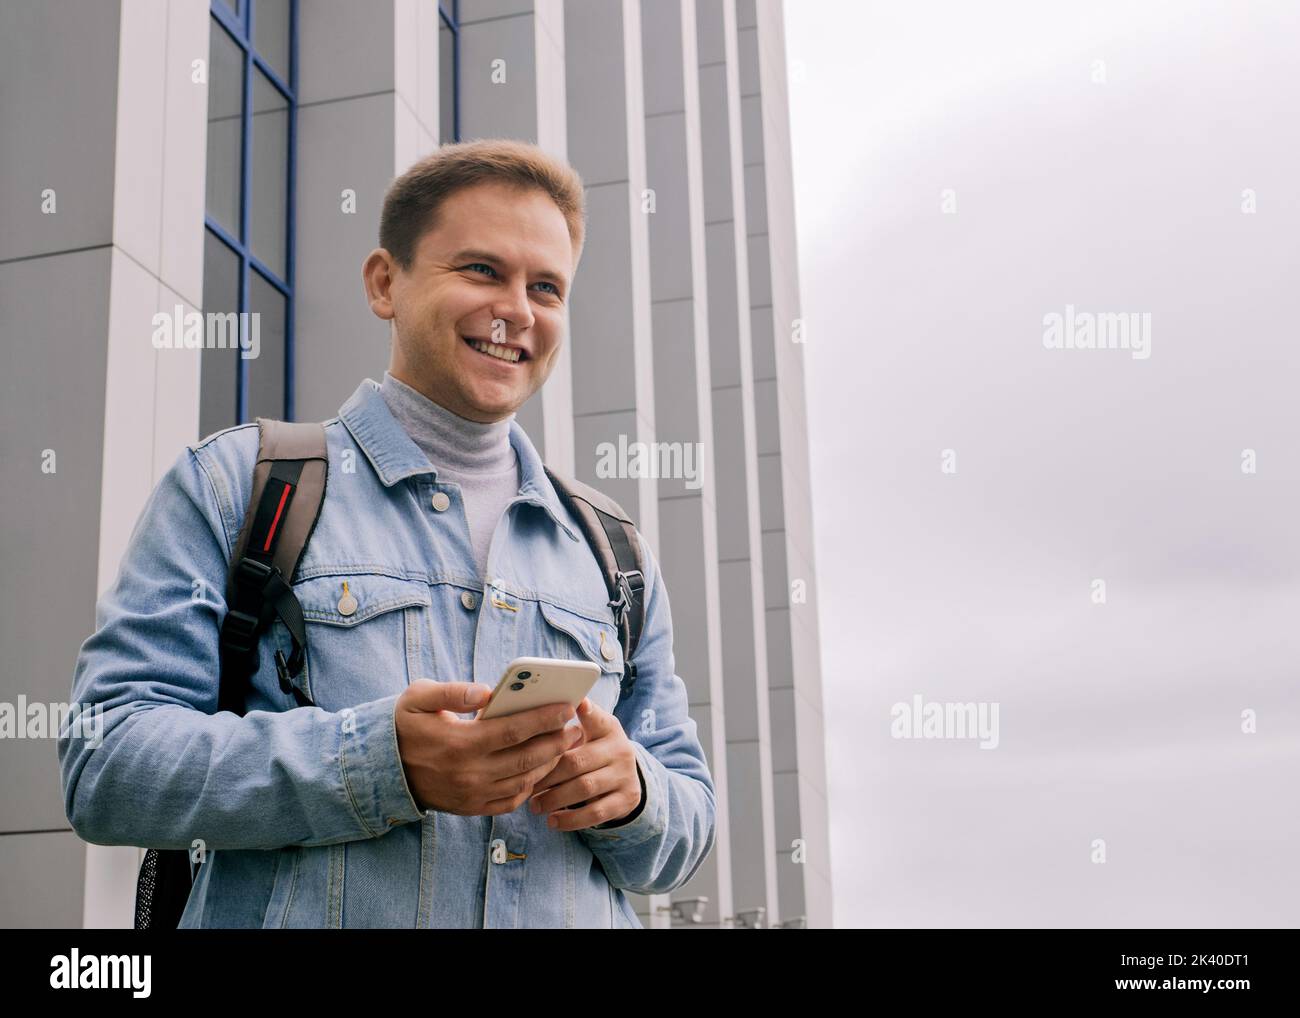 Young smiling man is holding cell phone Stock Photo